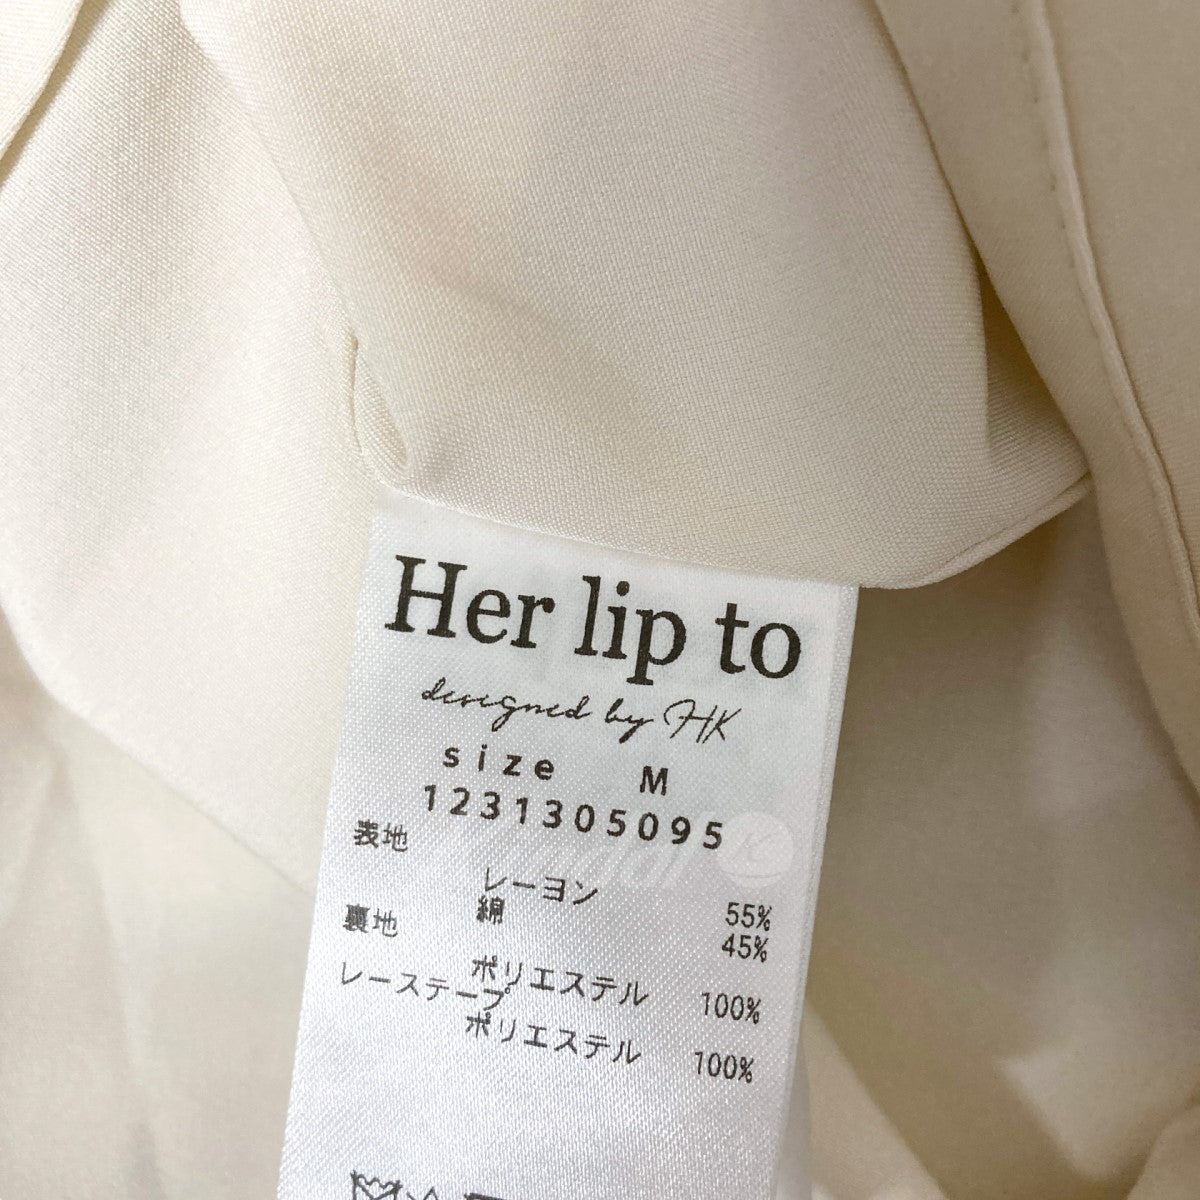 Her lip to(ハーリップトゥ) grace cotton-blend long dress 1231305095